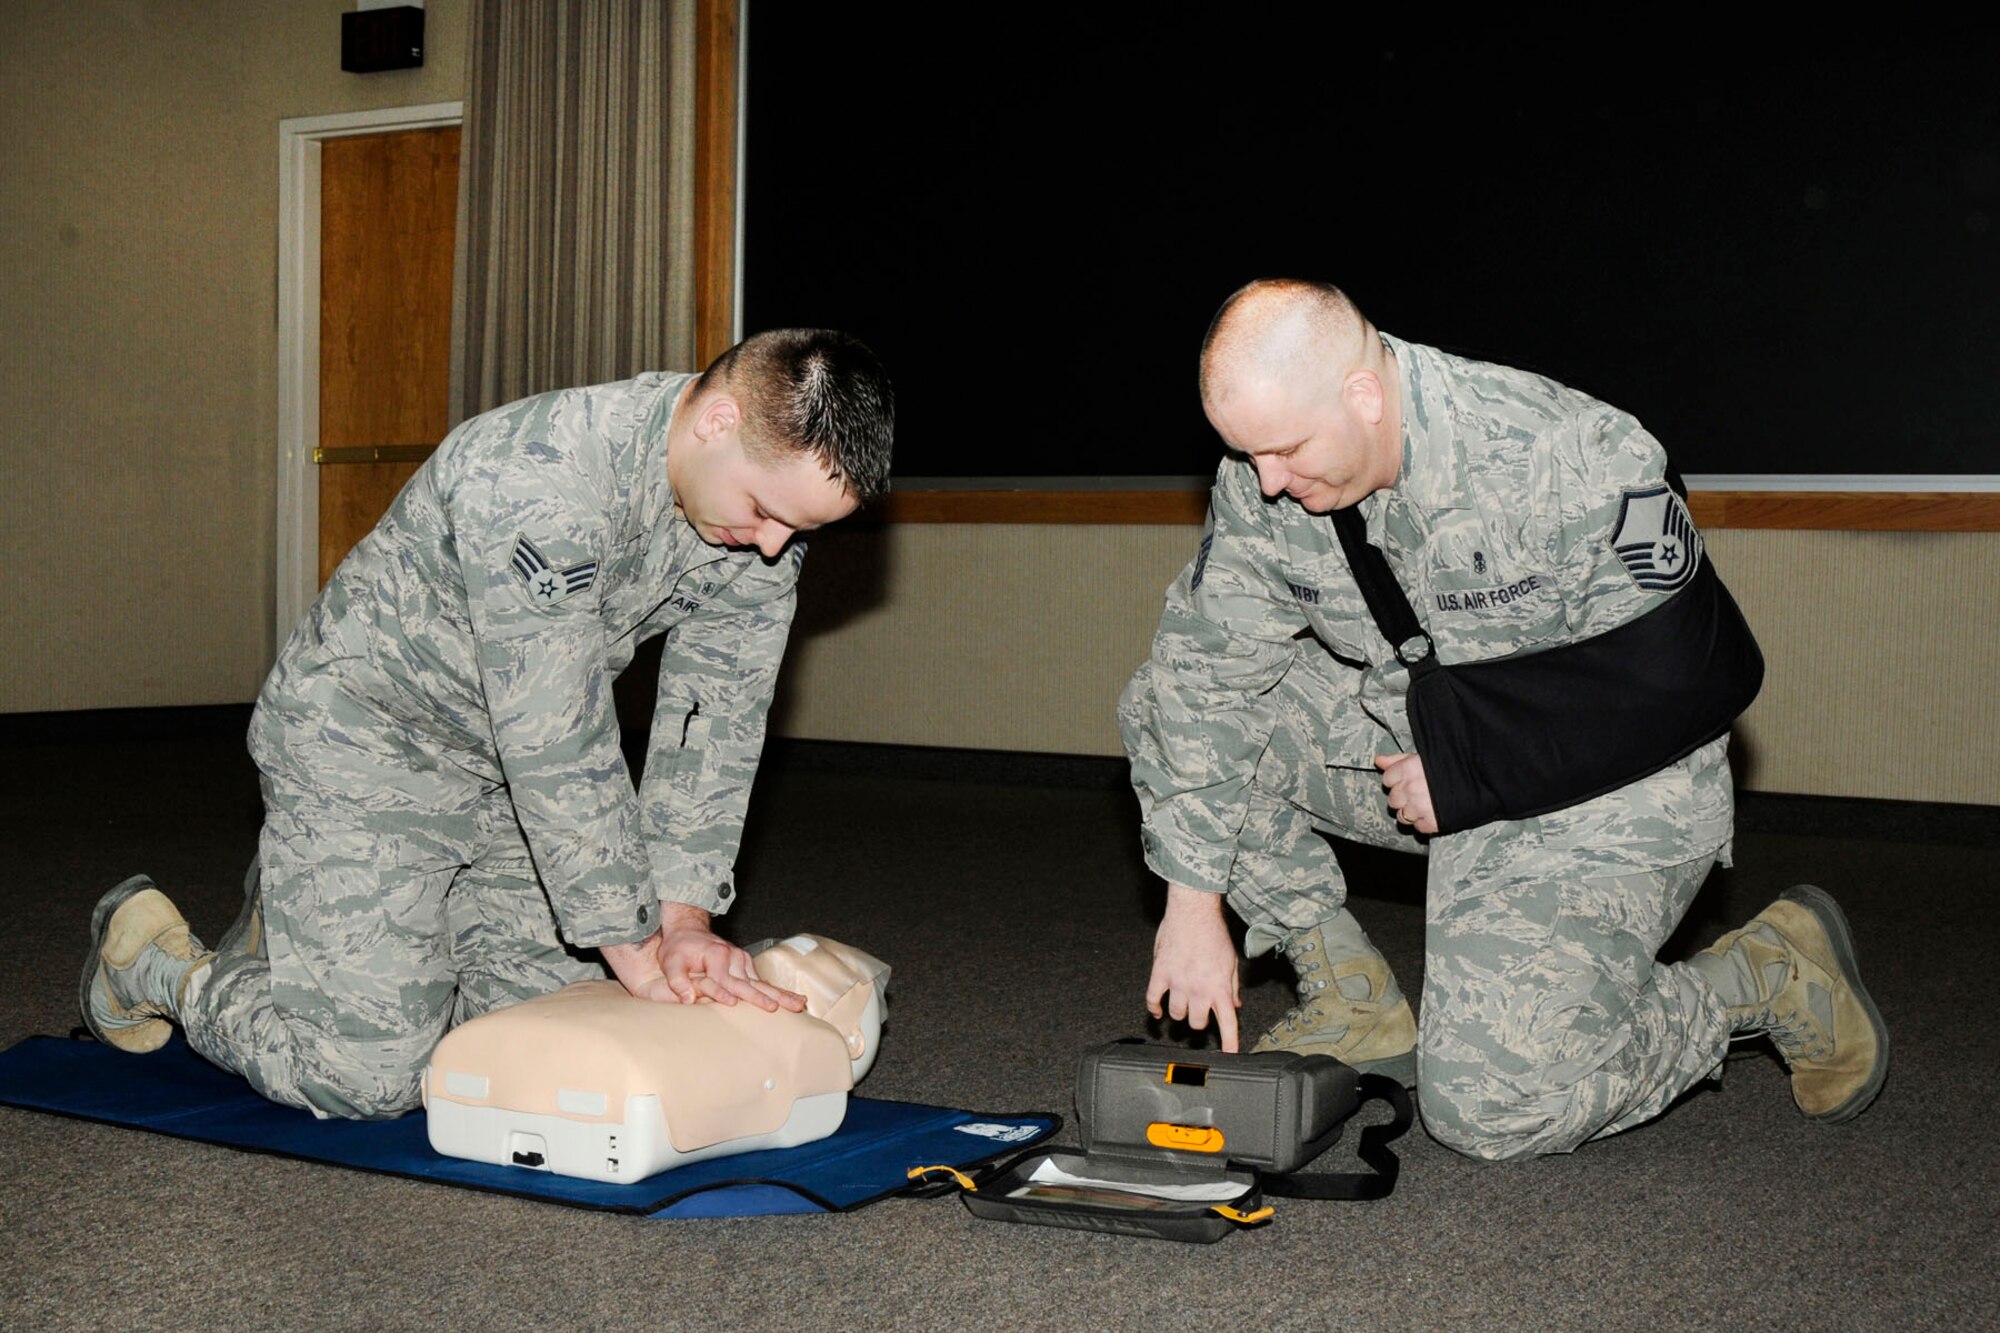 HANSCOM AIR FORCE BASE, Mass. -- Senior Airman Michael Trala (left) and Master Sgt. Brent Whitby, both members of the 66th Medical Squadron, demonstrate the correct procedures for cardiopulmonary resuscitation during a CPR informational course at the Hanscom Conference Center Feb. 6. CPR is a lifesaving technique useful in many emergency situations. (U.S. Air Force photo by Linda LaBonte Britt)